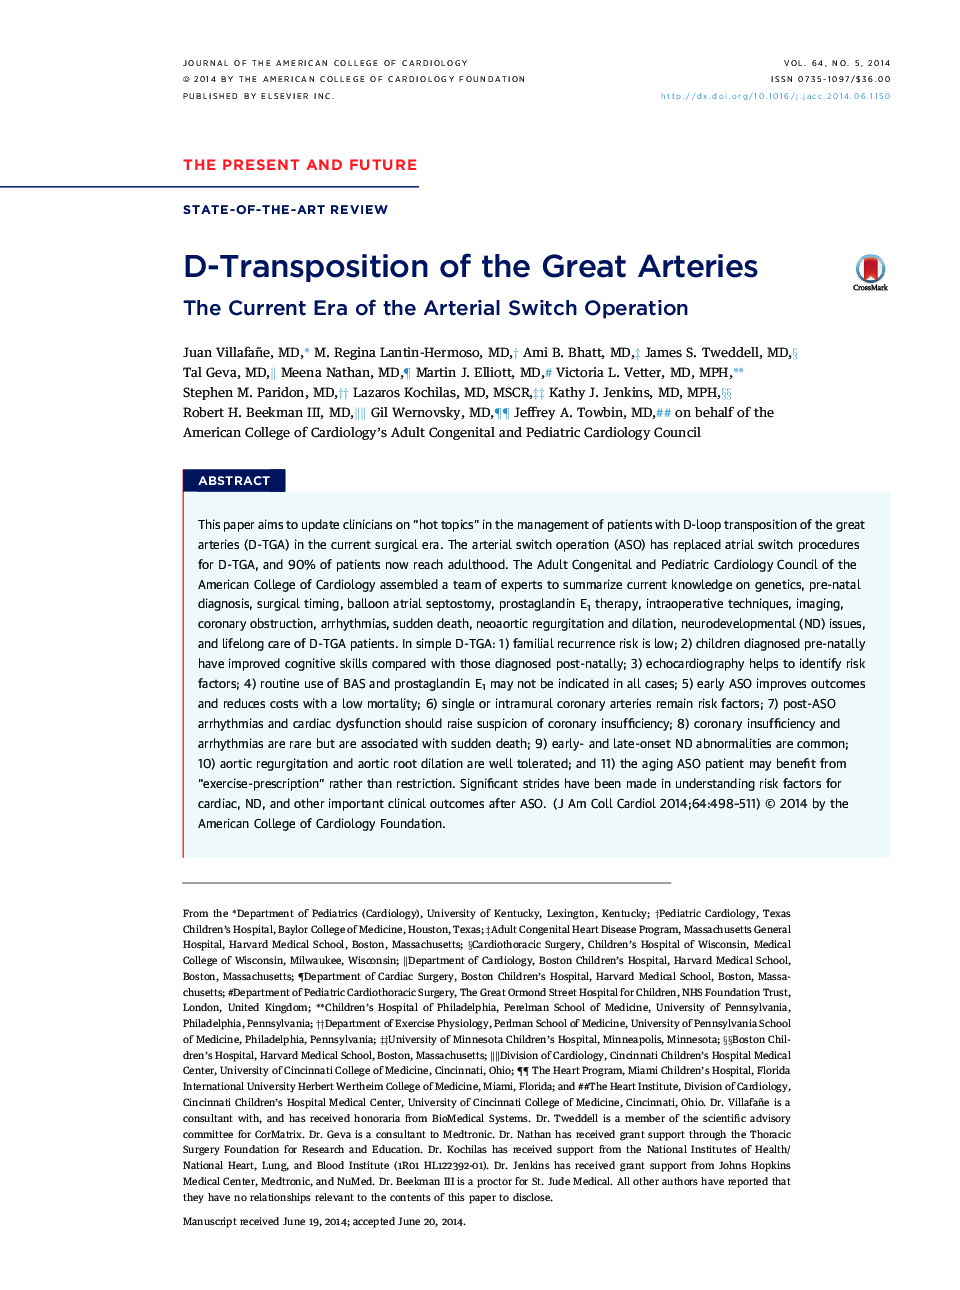 D-Transposition of the Great Arteries : The Current Era of the Arterial Switch Operation